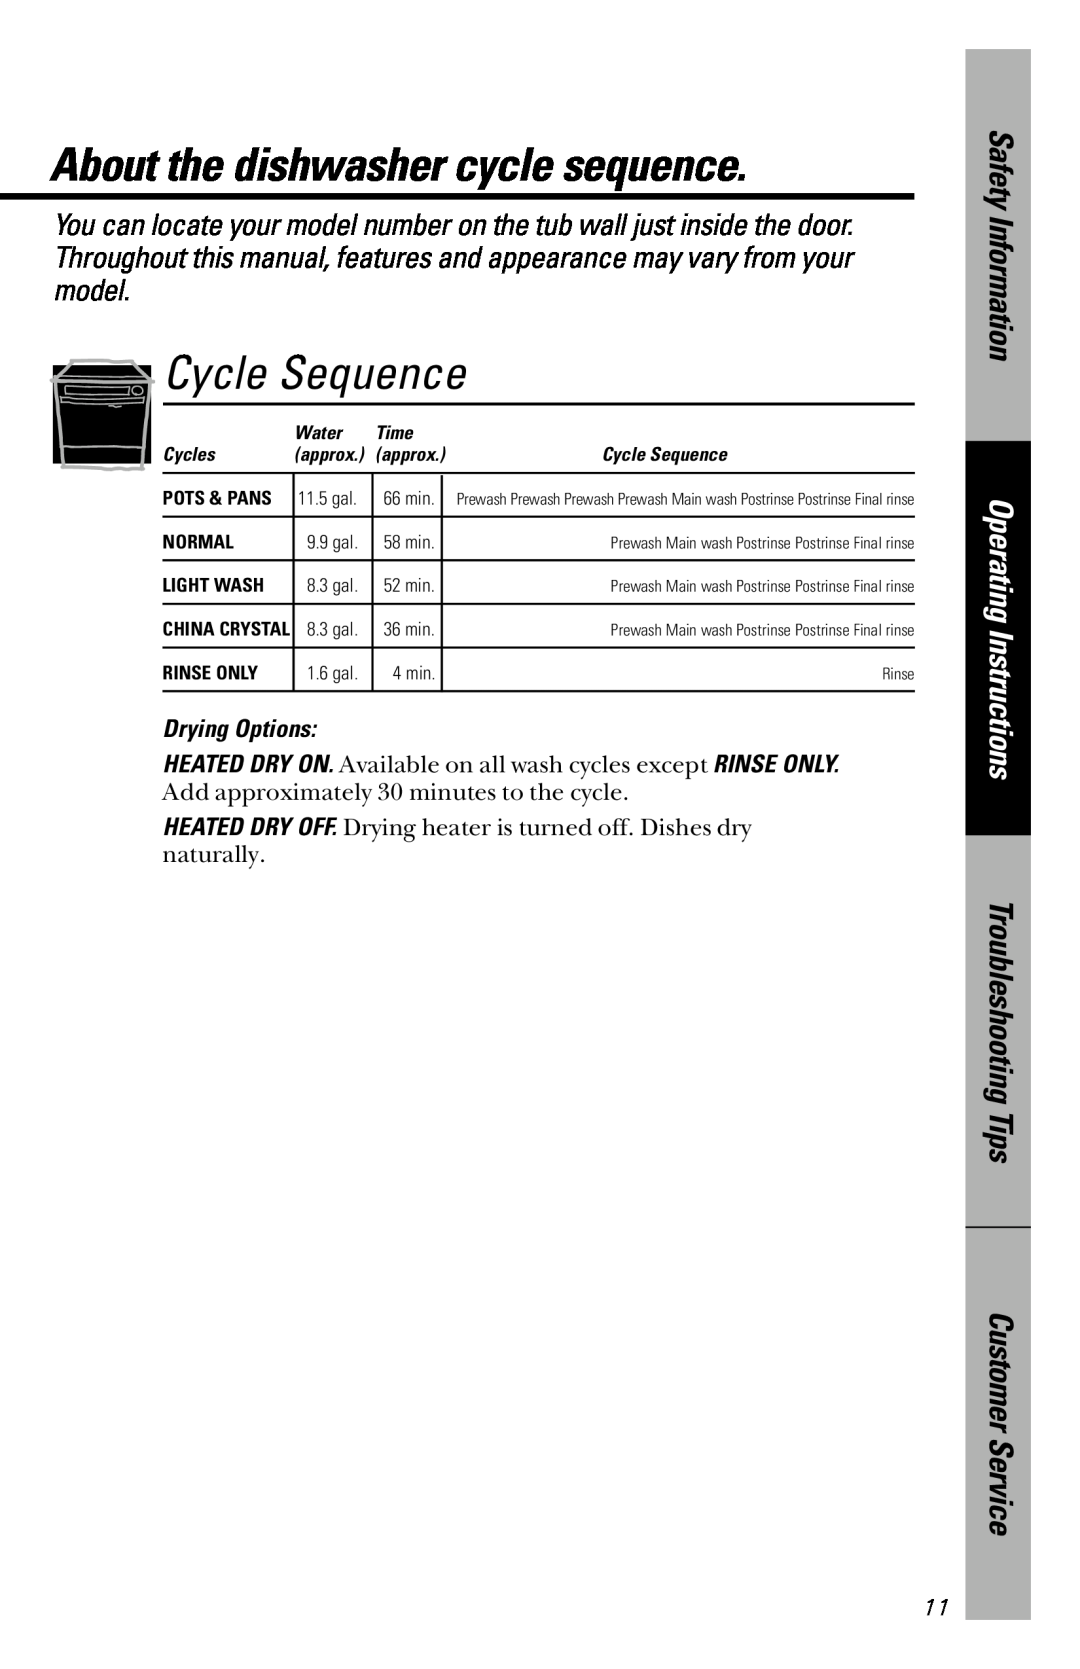 GE GSD5132 About the dishwasher cycle sequence, Cycle Sequence, Drying Options, Safety Information, Operating Instructions 